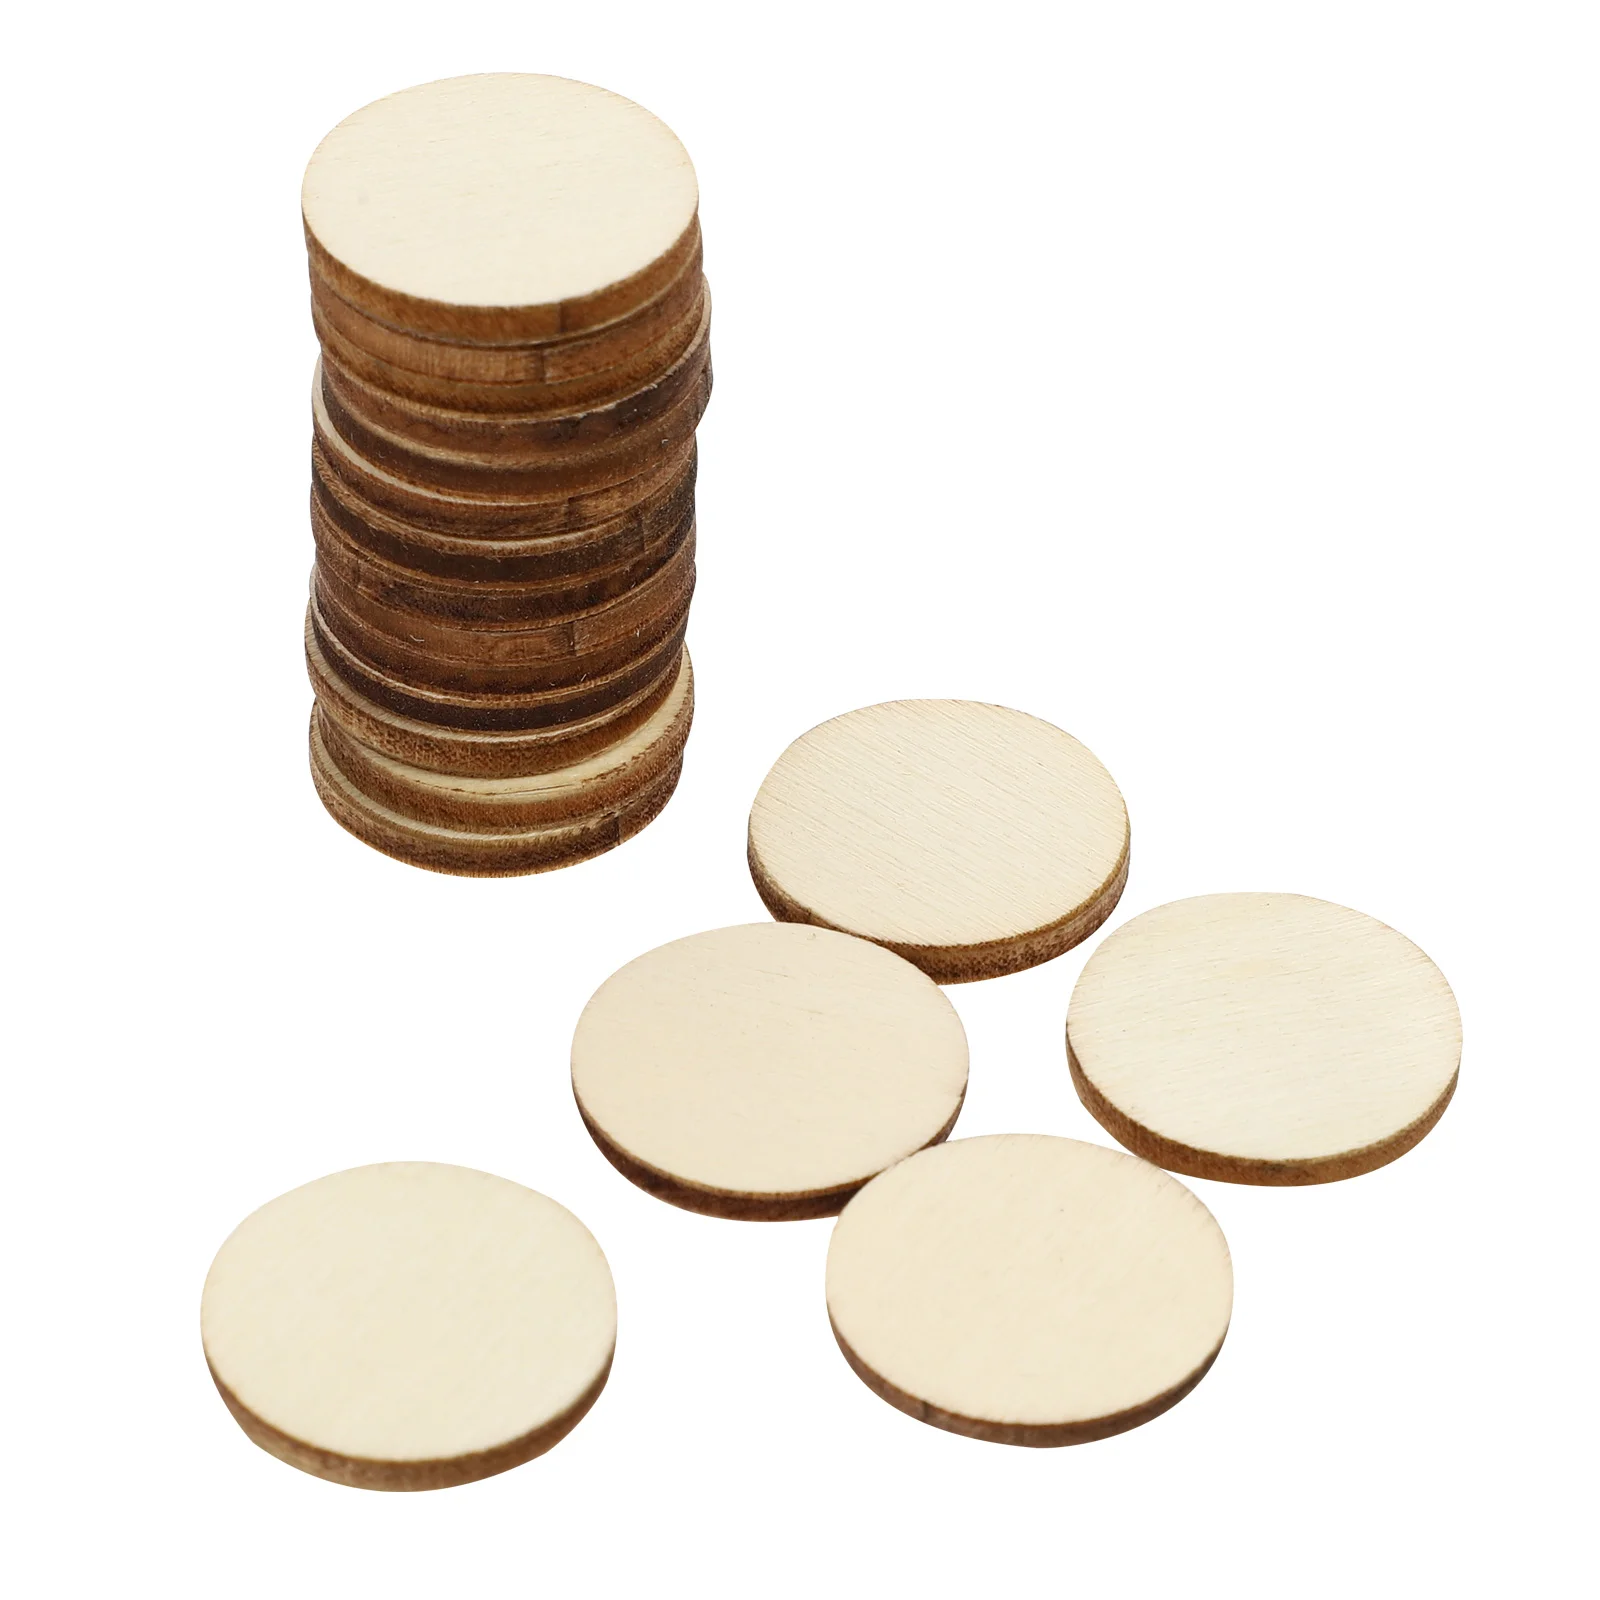 

Wood Discs Wooden Slices Circle Cutouts Round Square Slabs Ornaments Props Diy Embellishments Craft Blank Tag Unfinished Pieces